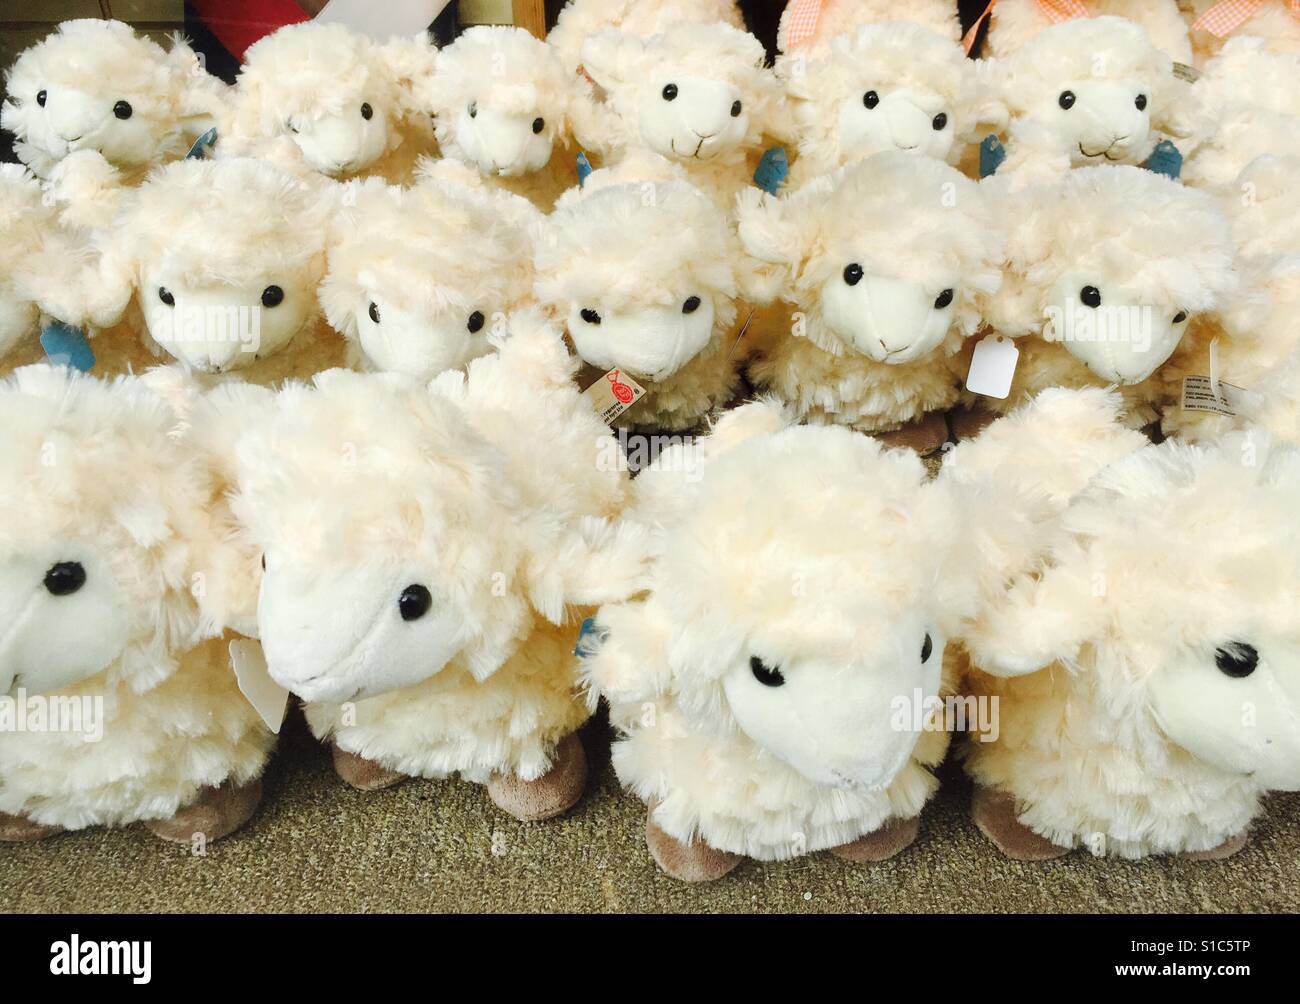 Fluffy toy sheep Stock Photo